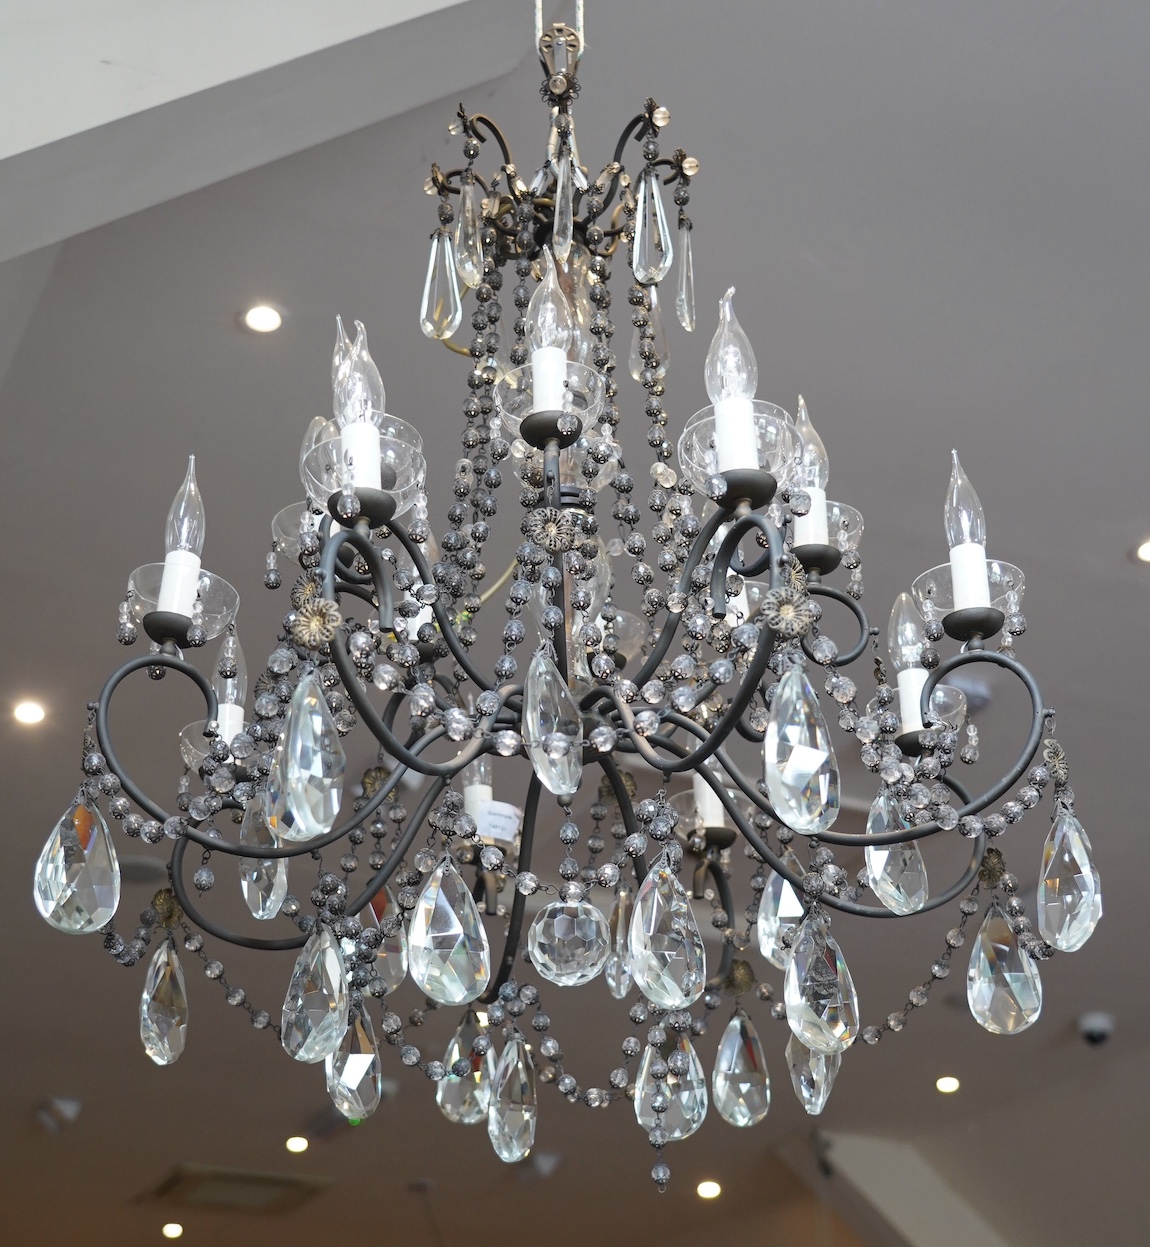 A two tier chandelier with eight branches on each tier, together with a pair of three branch wall lights, chandelier approximately 73cm high